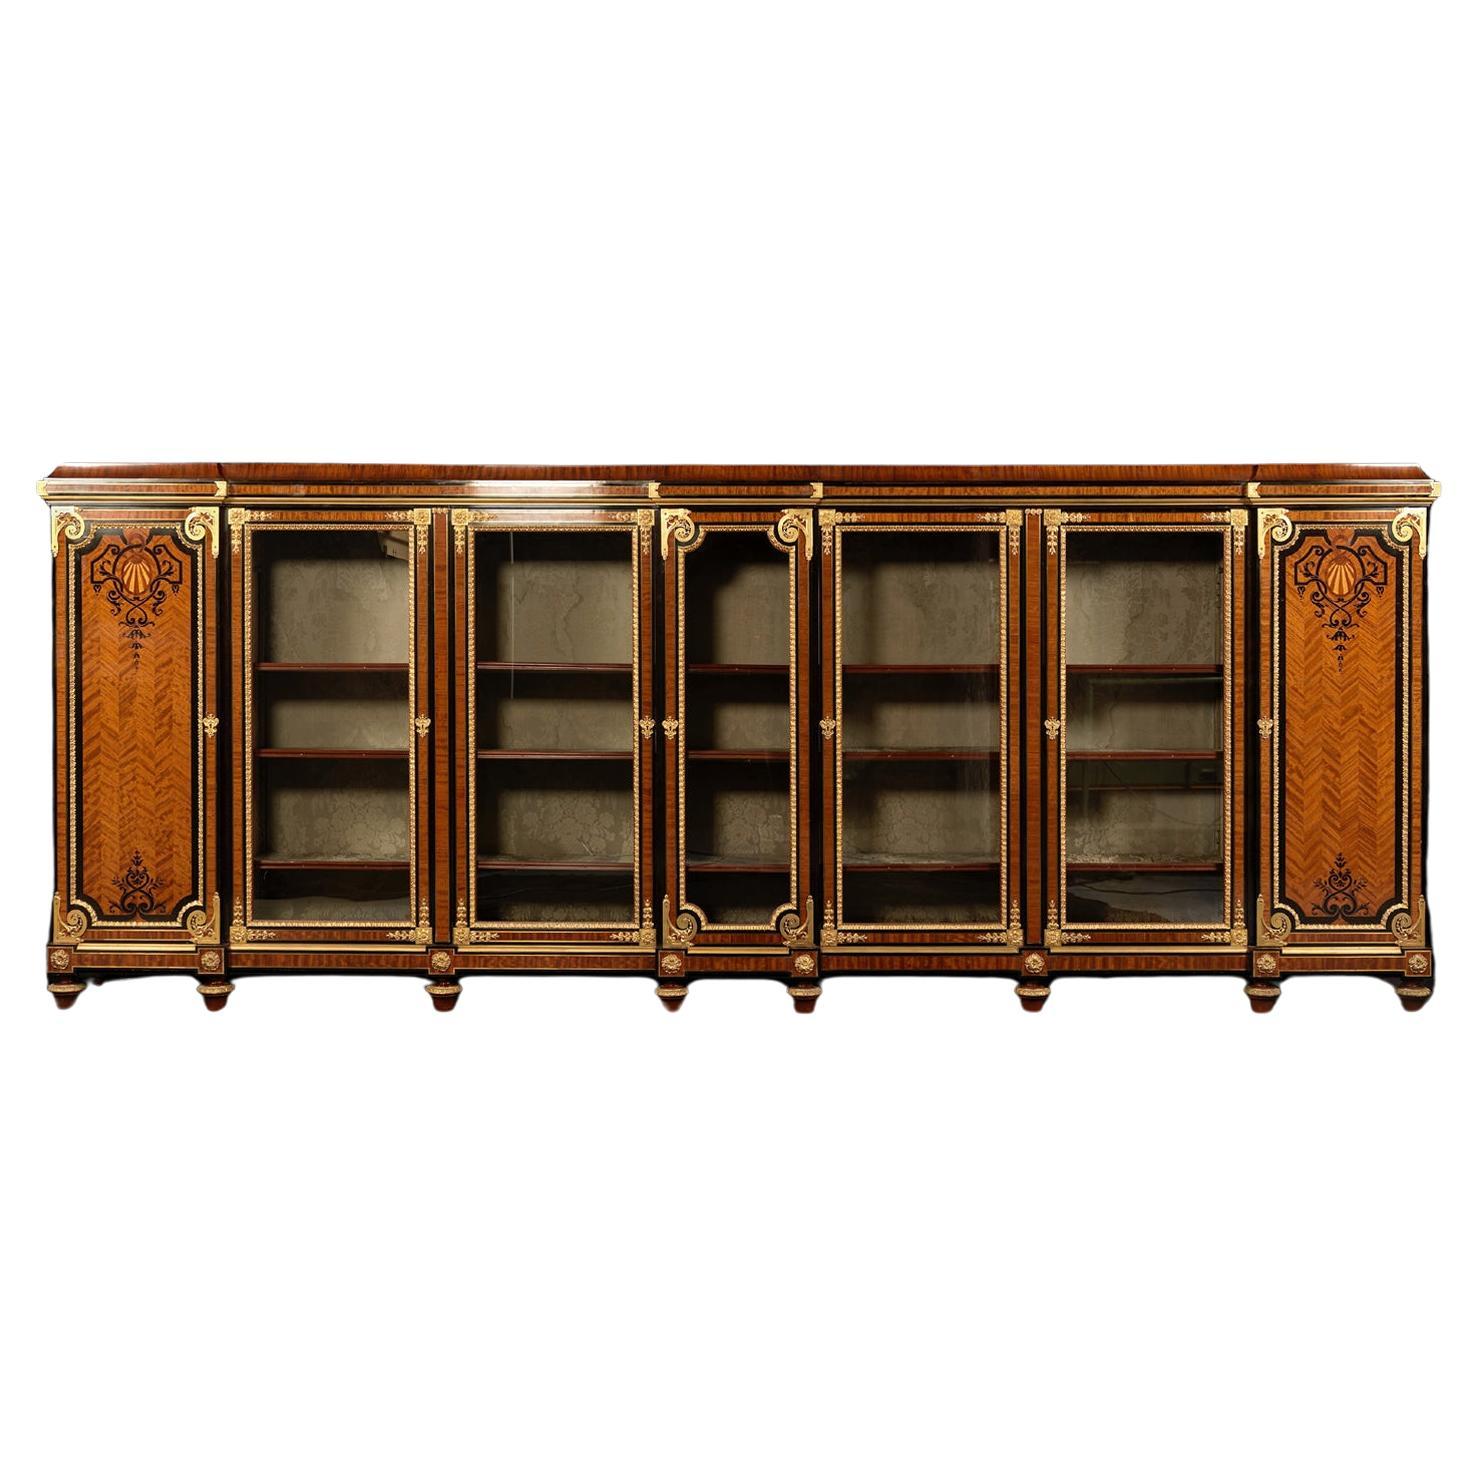 Gilt-Bronze Mounted Marquetry Inlaid Bookcase